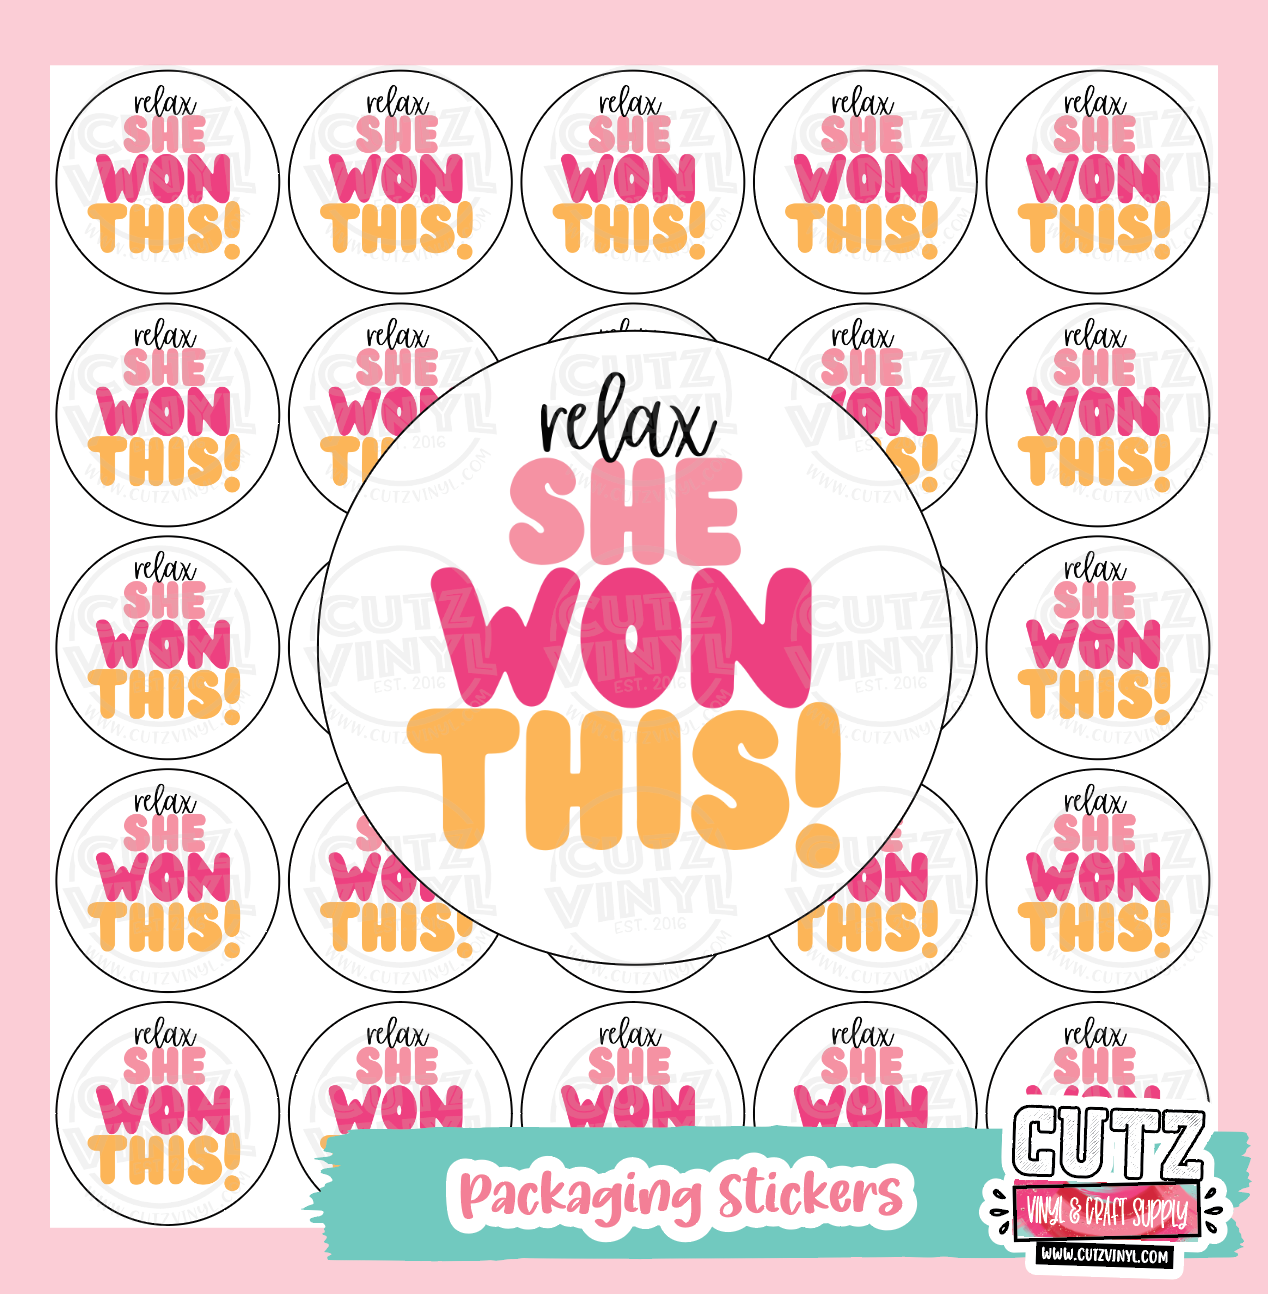 Relax She Won This Packaging Stickers